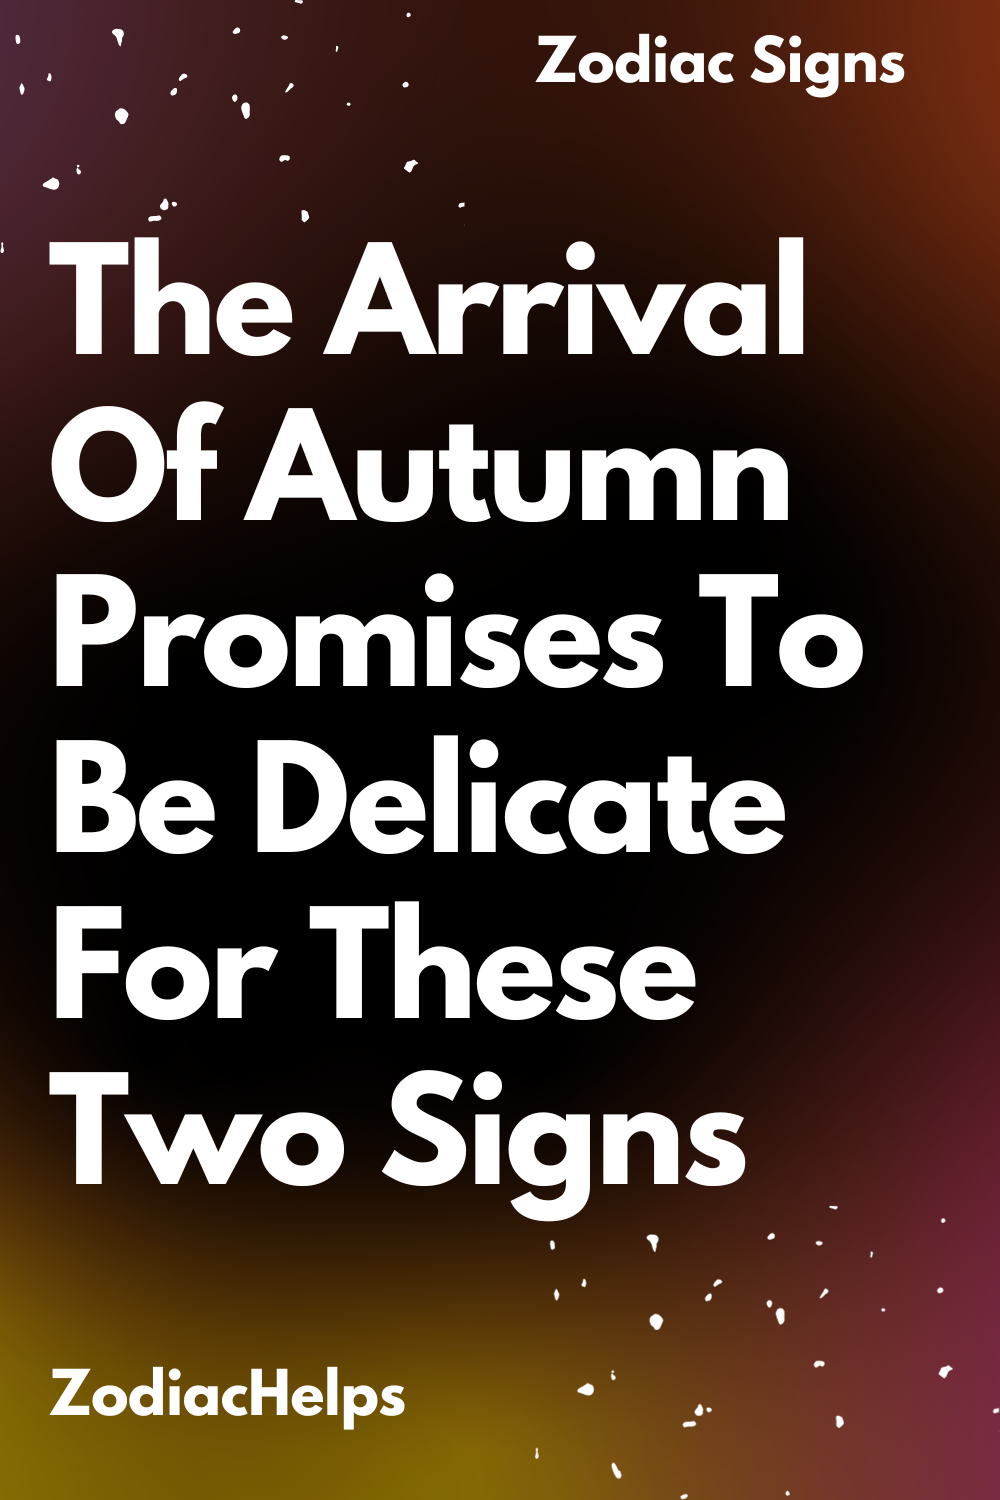 The Arrival Of Autumn Promises To Be Delicate For These Two Signs